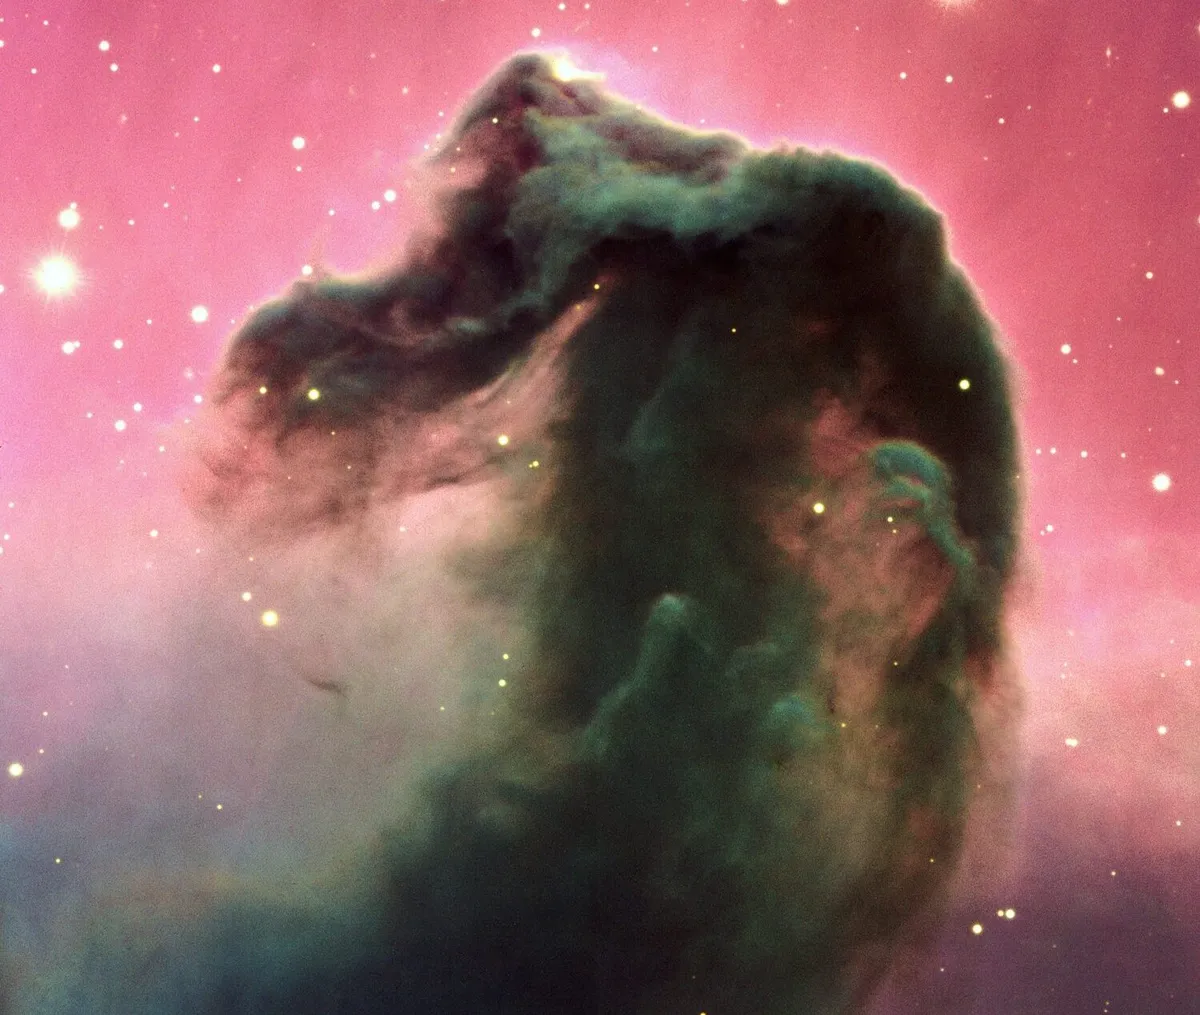 Against the red glow of the Orion Molecular cloud is a dark curl of dust that forms the unmistakable shape of a Horsehead Nebula. The larger cloud is a giant stellar nursery, and it’s thought the Horsehead Nebula has enough mass to create 30 Sun-like stars. Credit: ESO